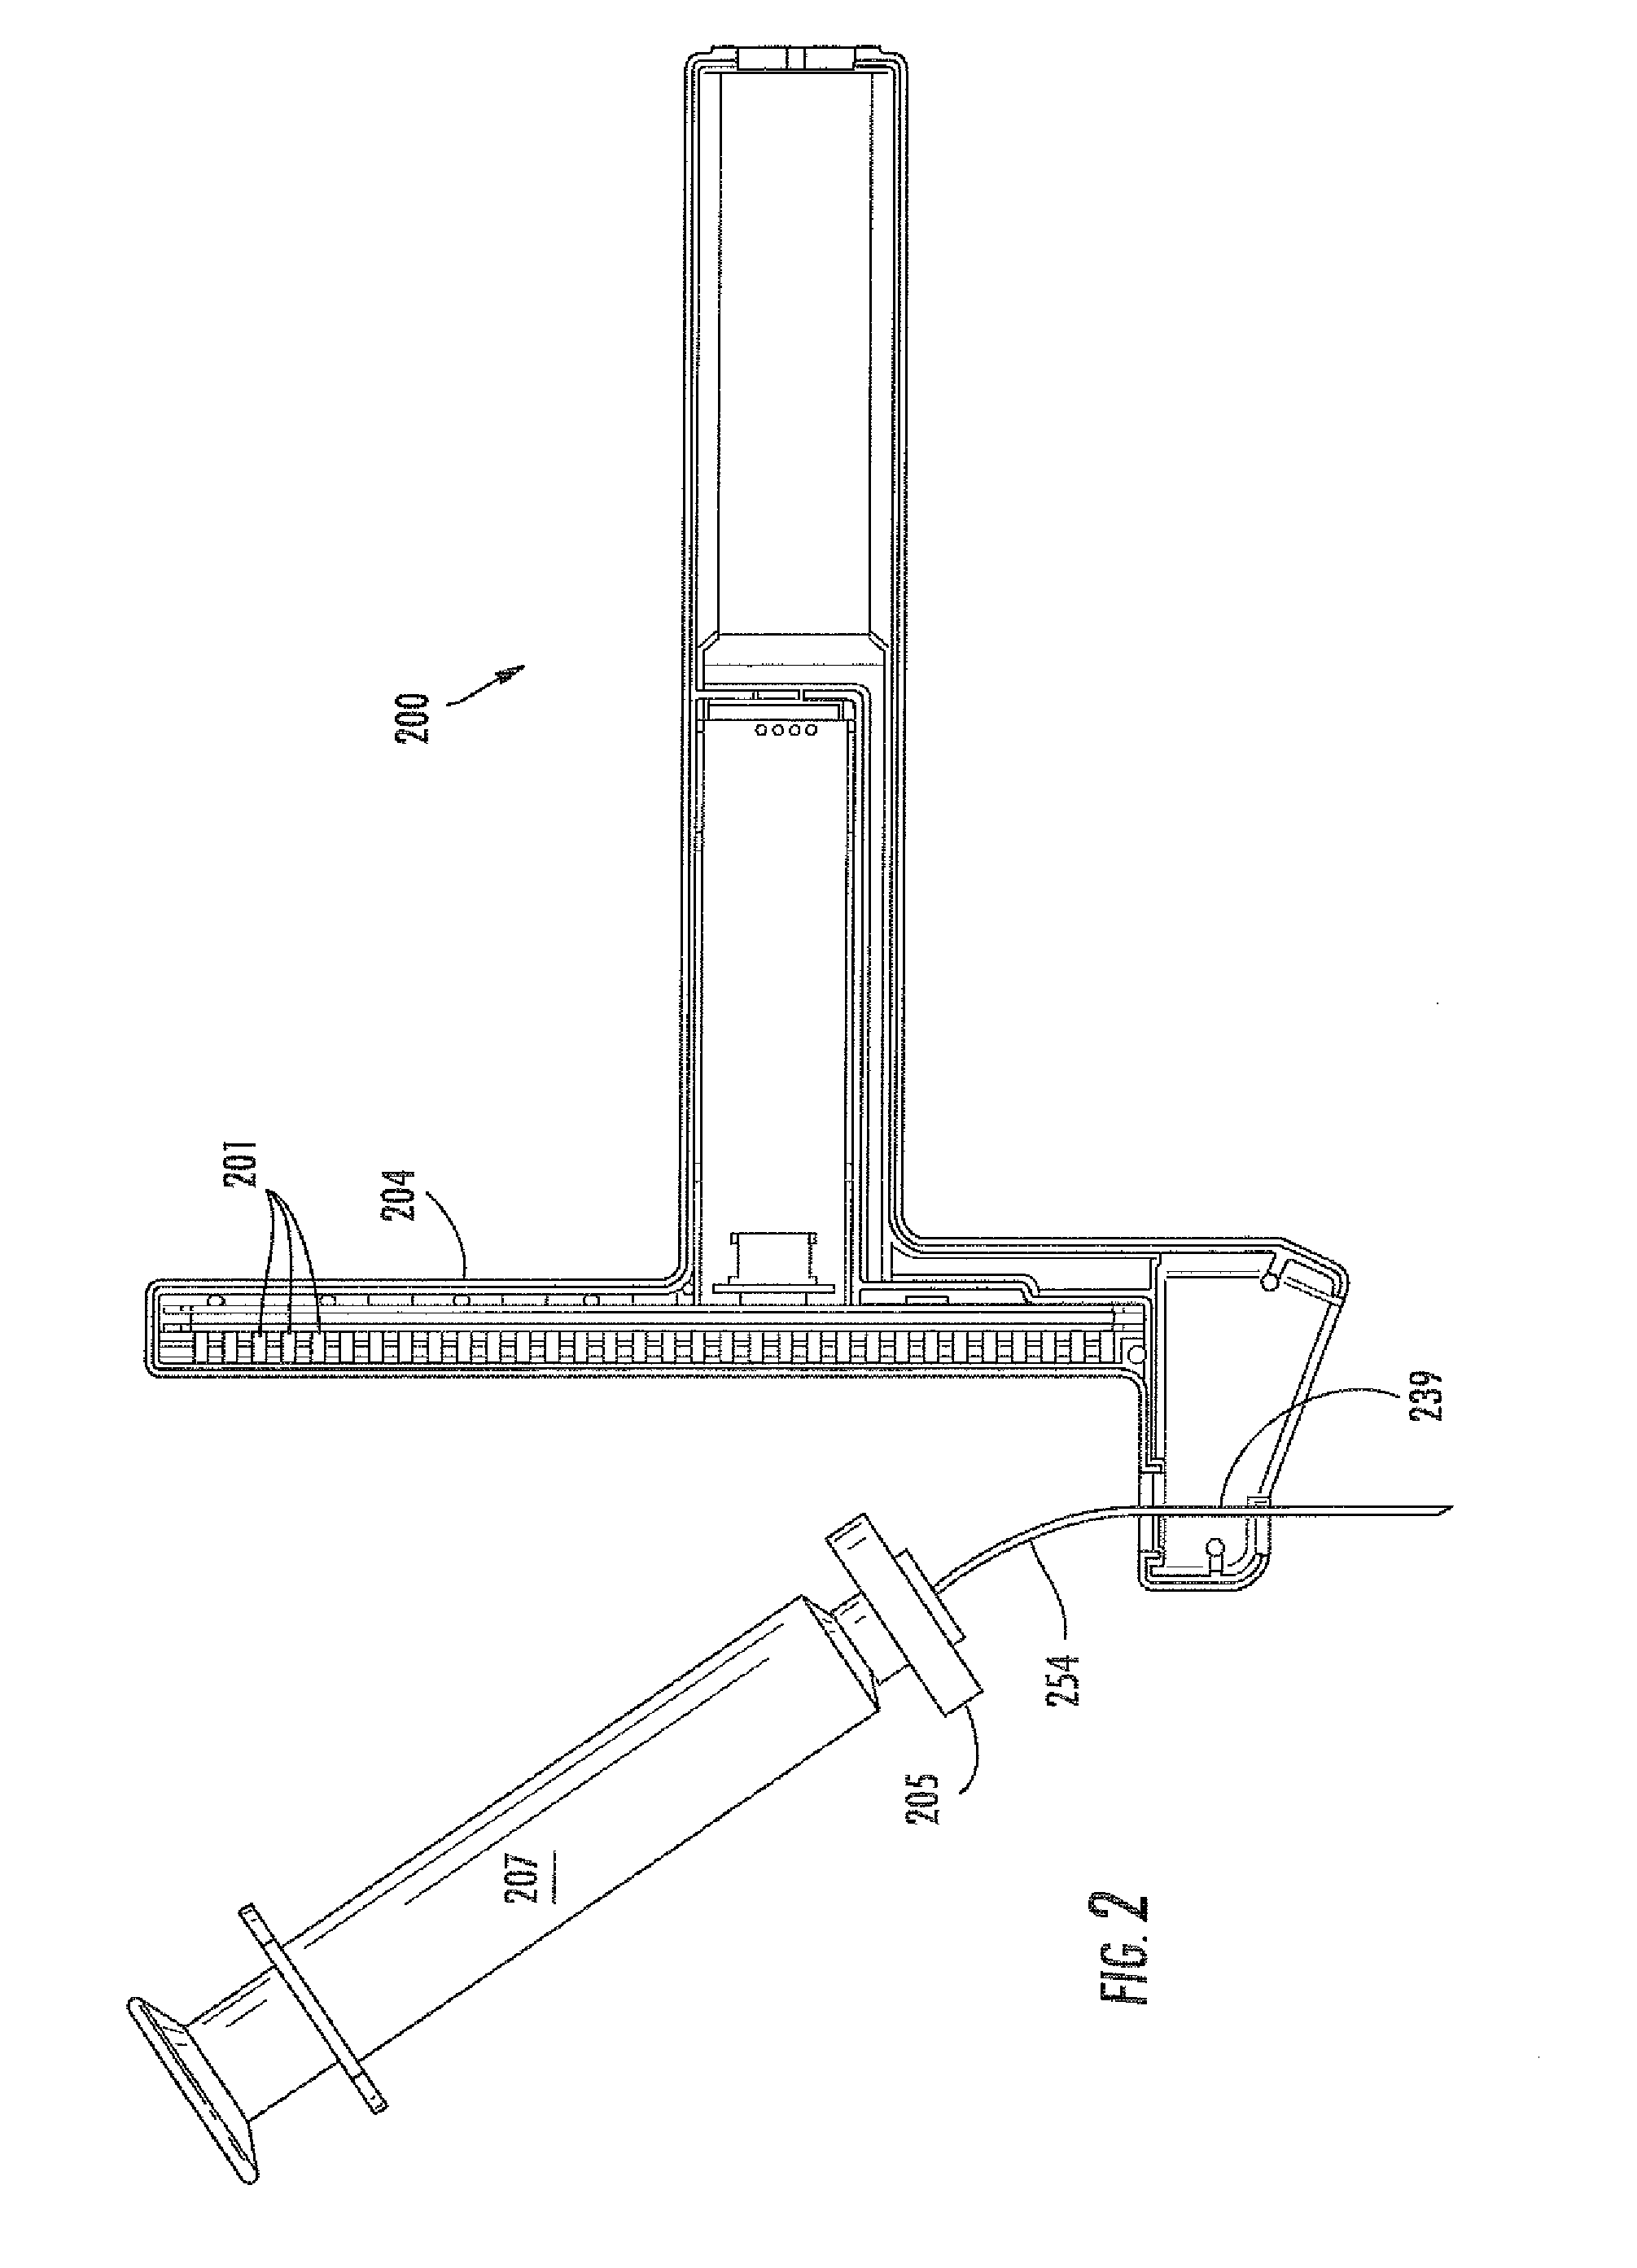 Virtual image formation method for an ultrasound device